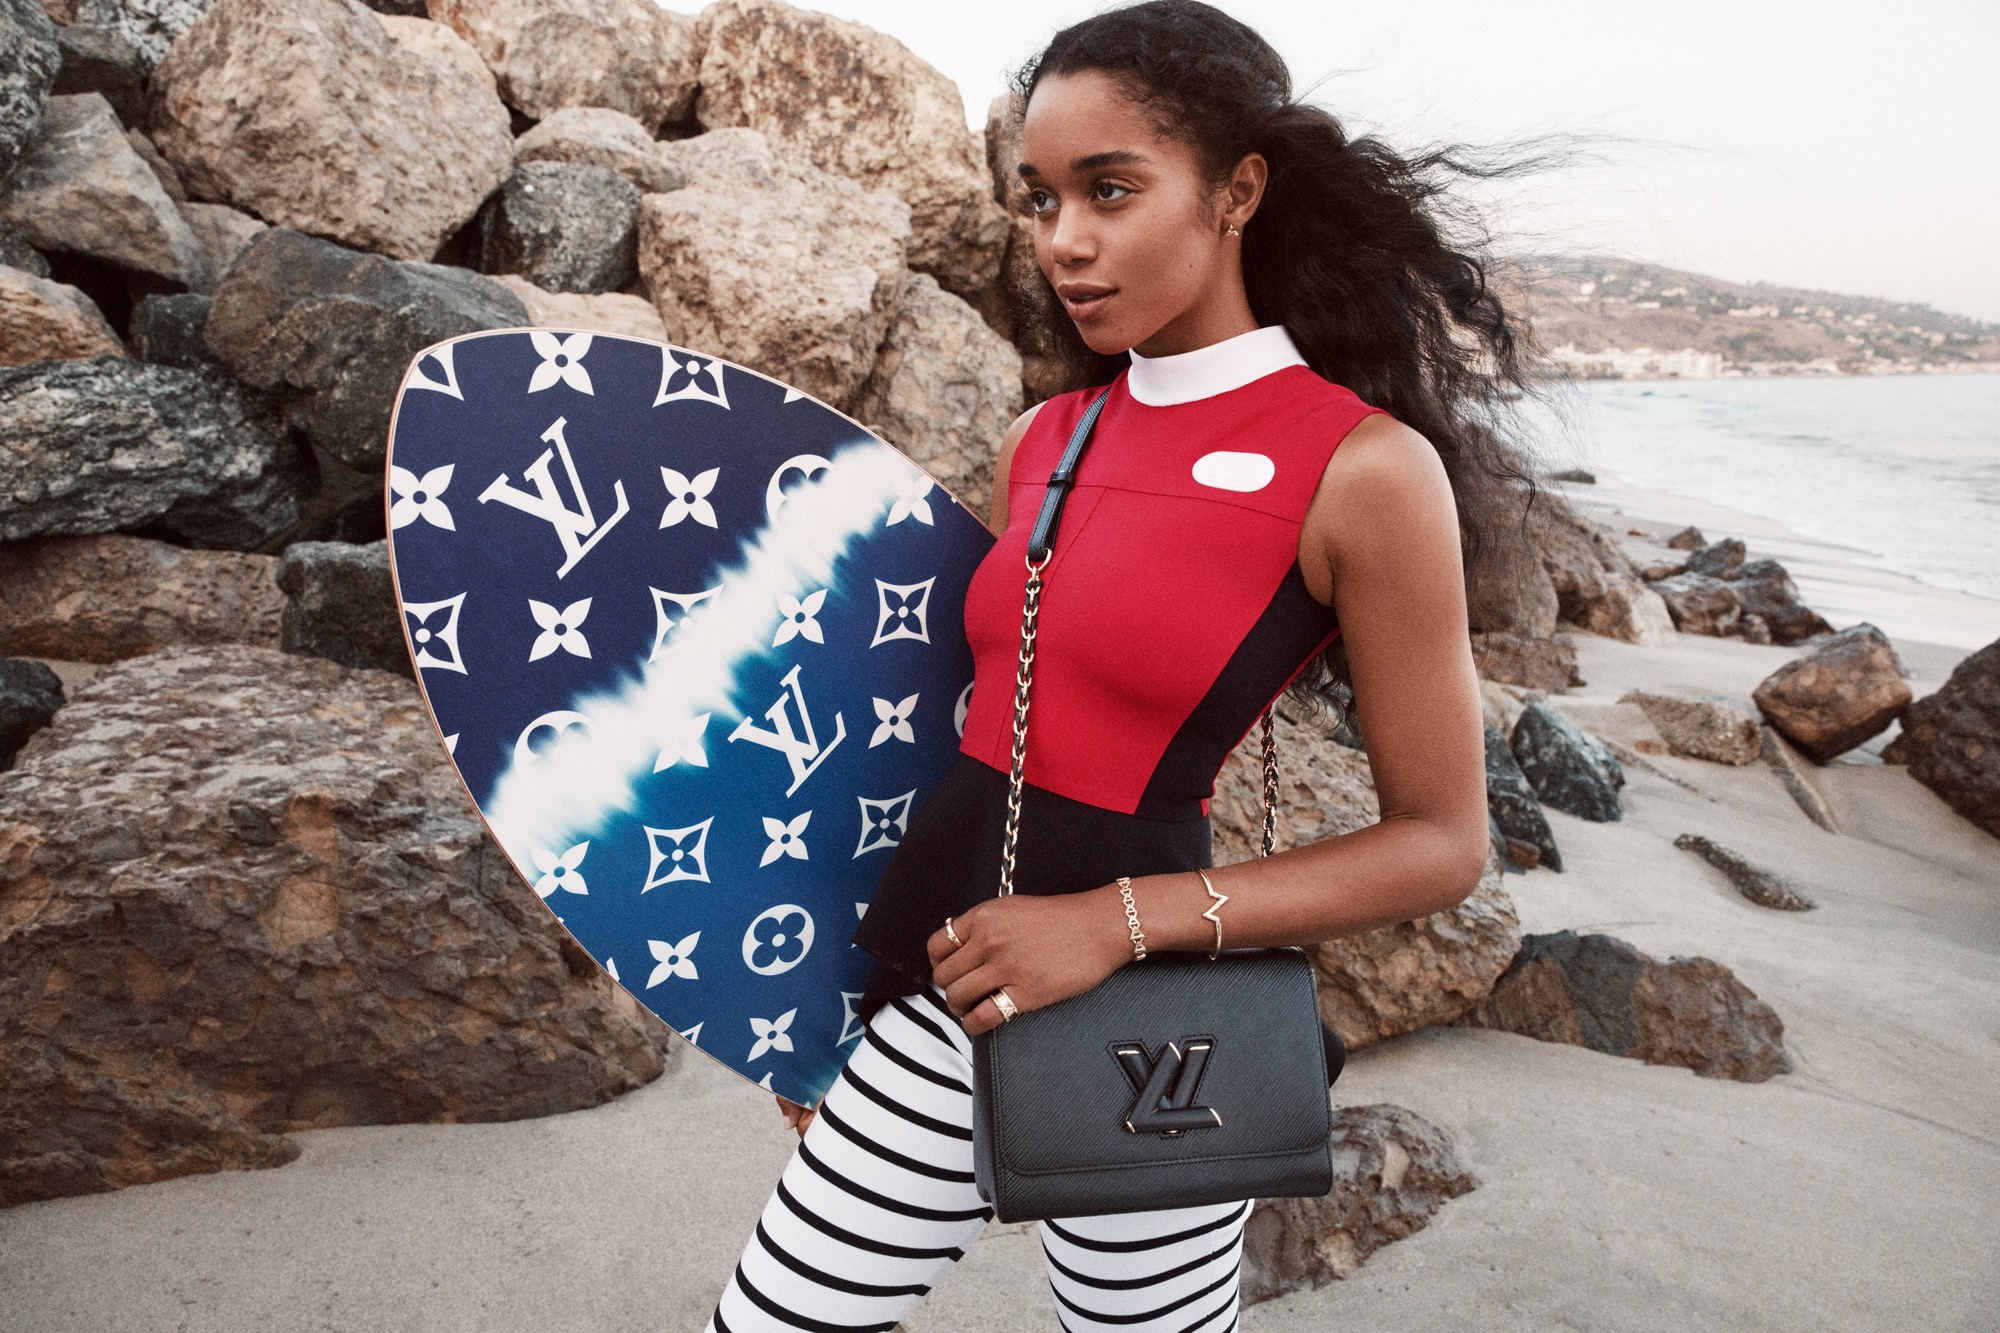 Louis Vuitton Offers A Fresh Take On Their Iconic Twist Bag For Spring 2021  - V Magazine